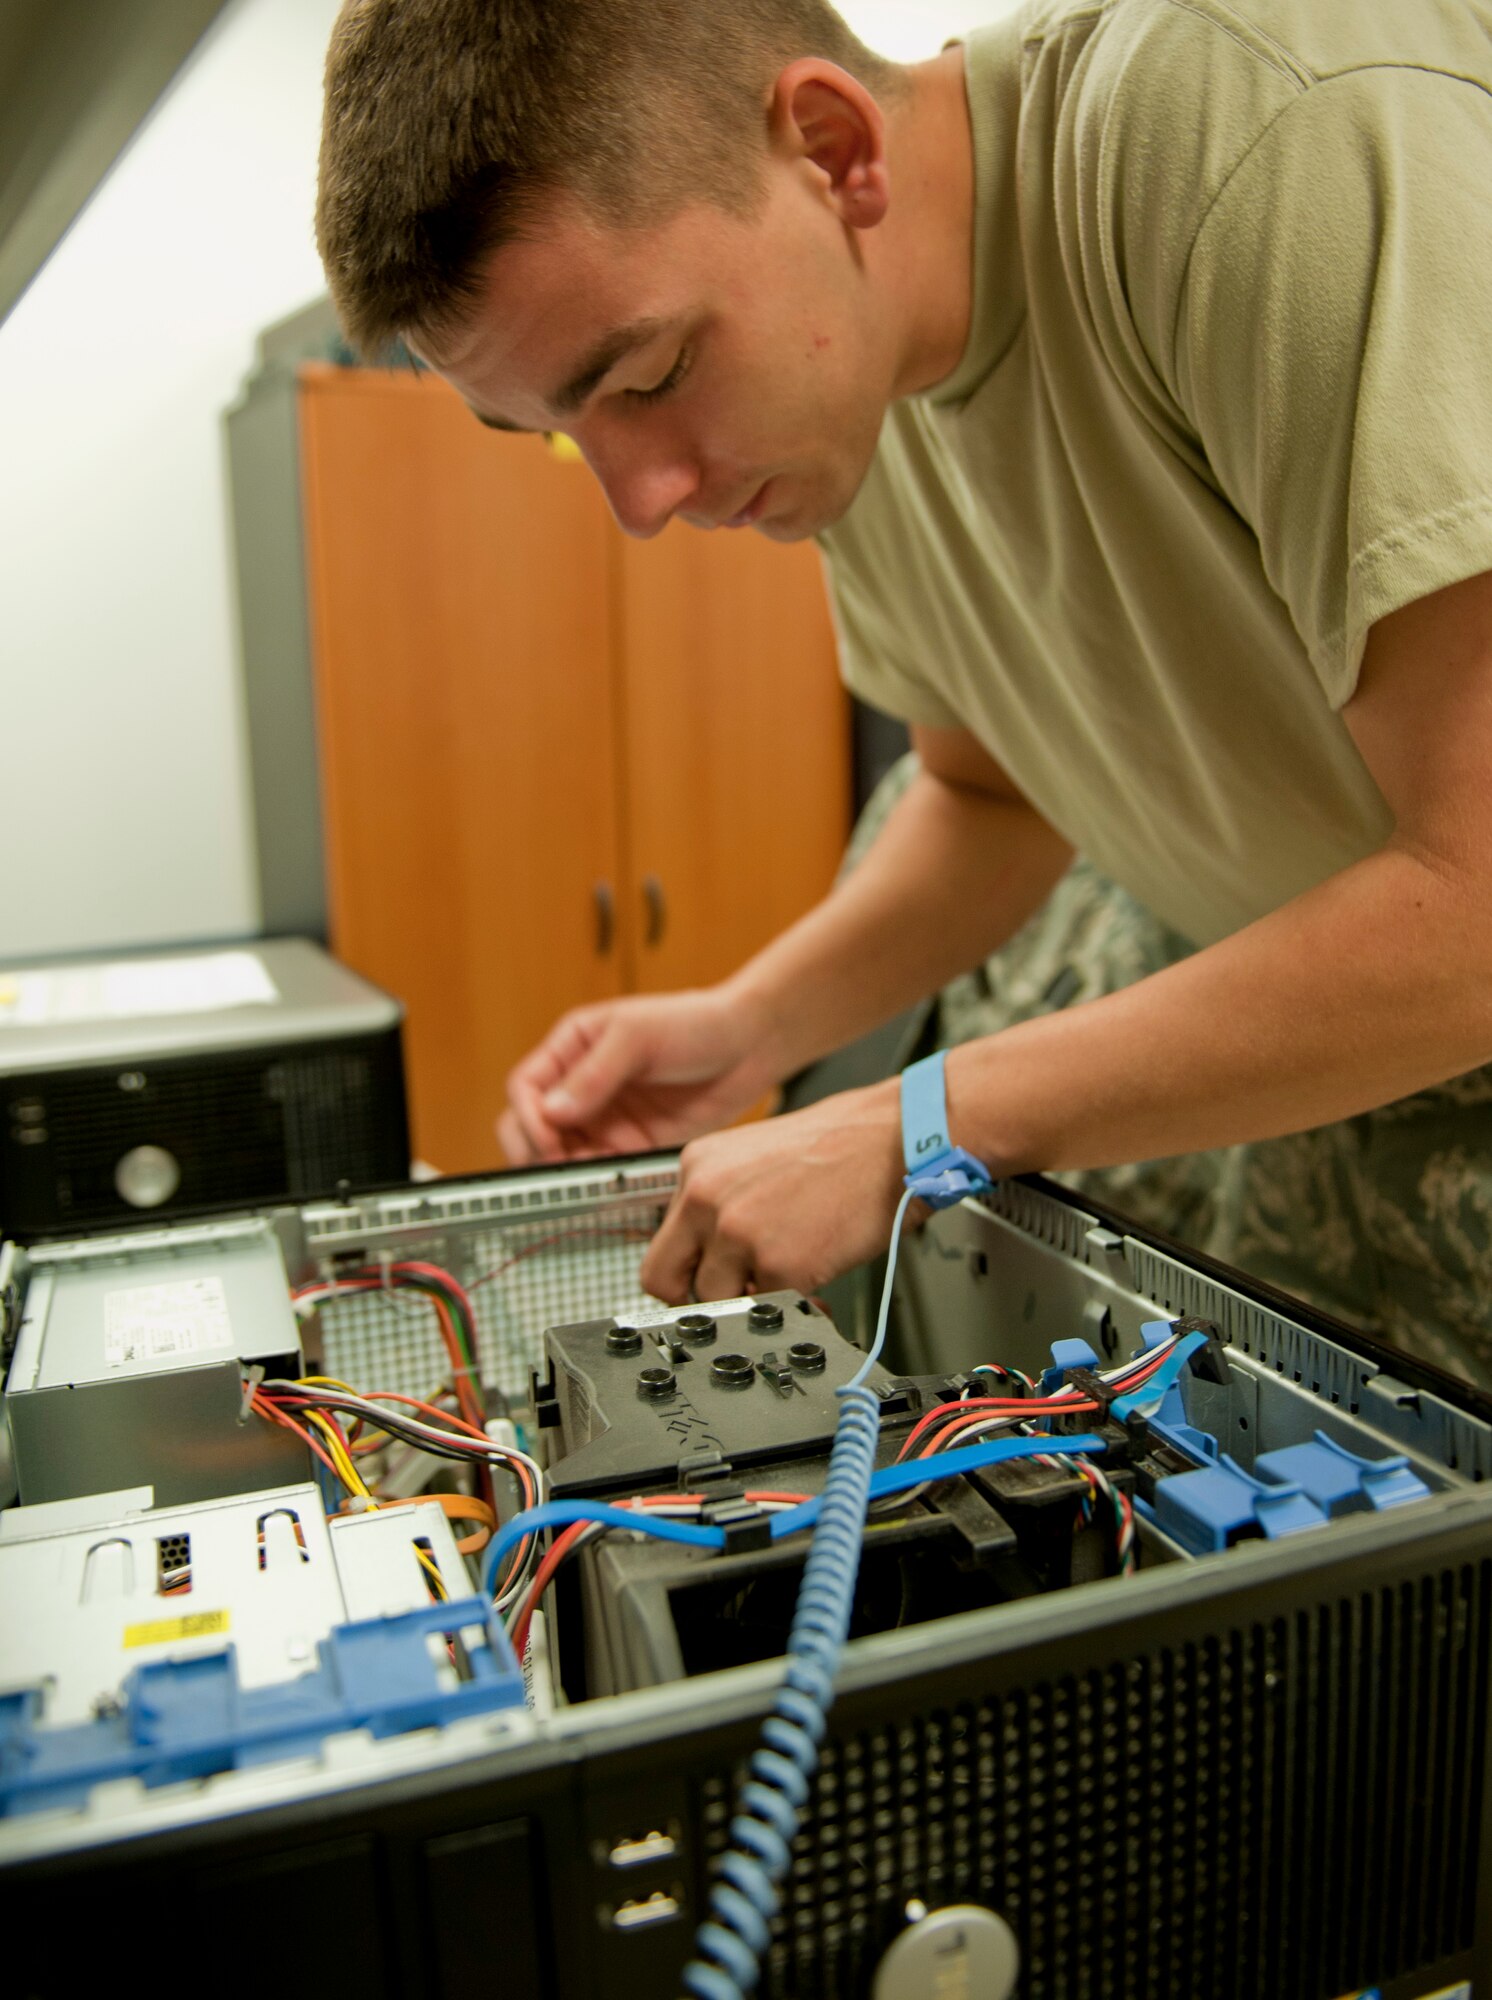 Airman 1st Class Mike Hareld, 39th Communications Squadron base equipment control officer, removes a faulty video card from a computer Oct. 11, 2011, at Incirlik Air Base, Turkey. As part of his equipment control duties, Hareld ensures computers are working properly before being used by units on base. (U.S. Air Force photo by Senior Airman Anthony Sanchelli/Released) 
